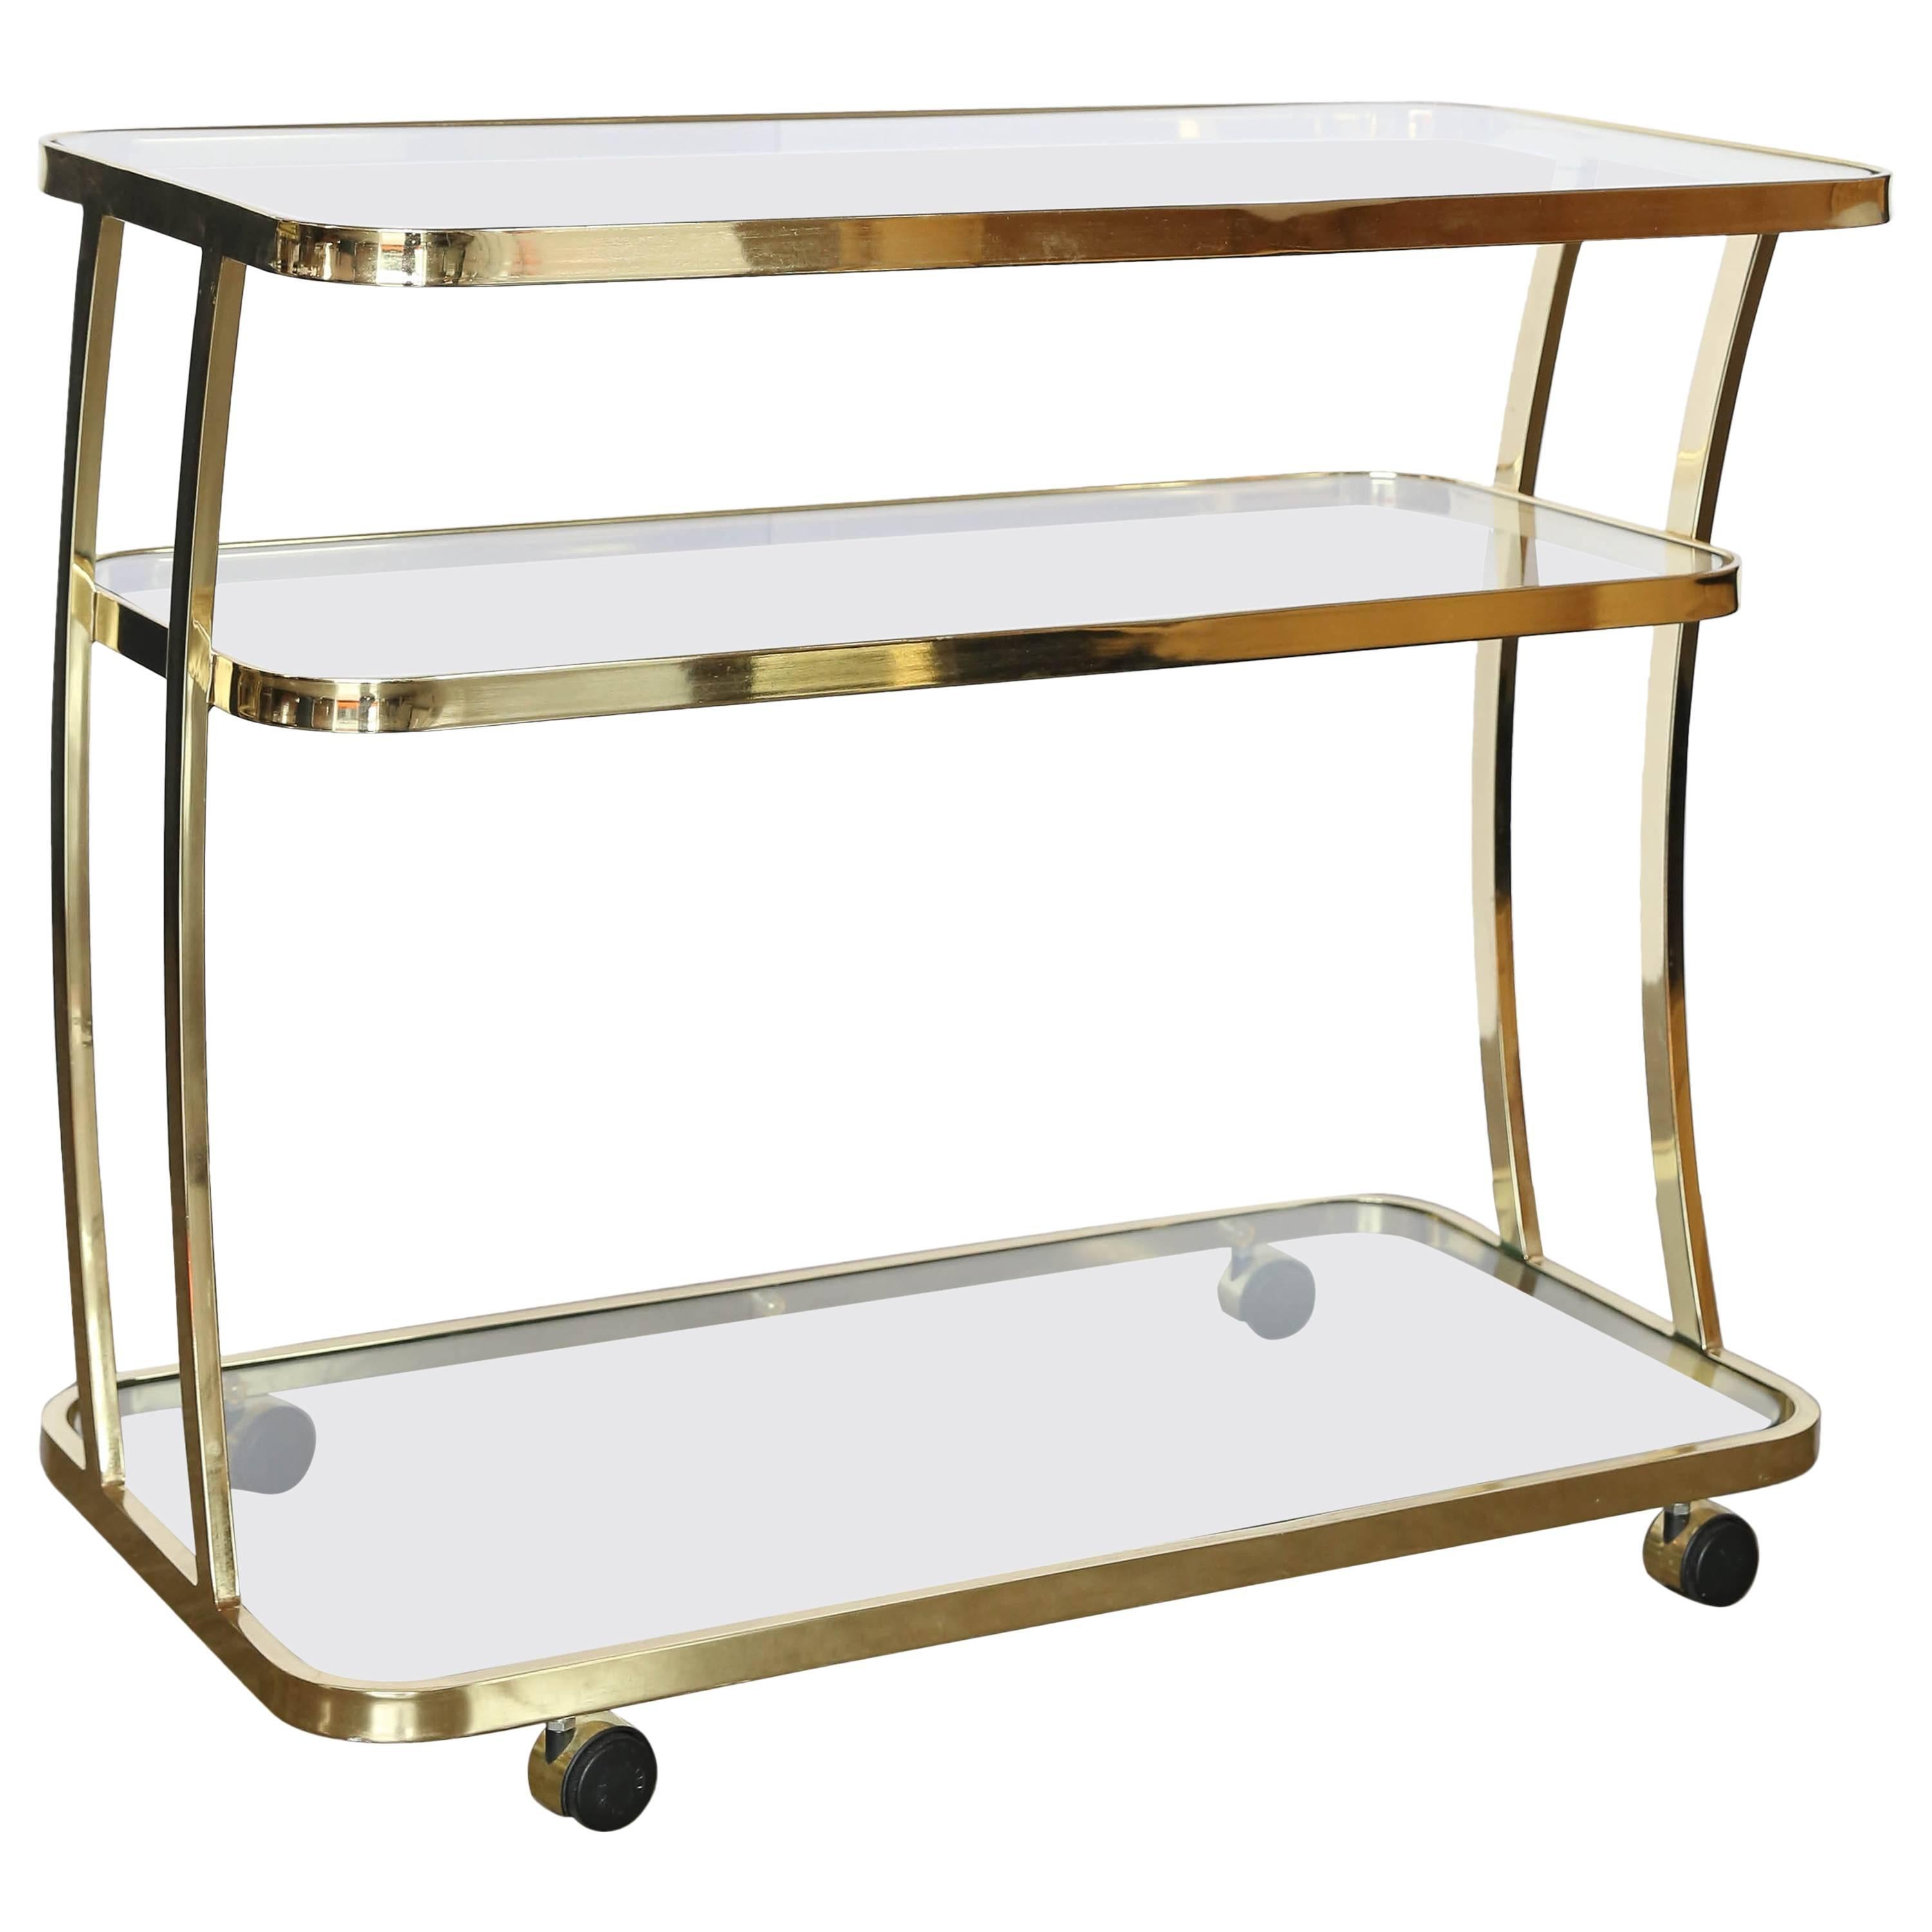 Dia Three-Tier Brass and Glass Bar, Drinks, Tea or Service Cart /Trolley